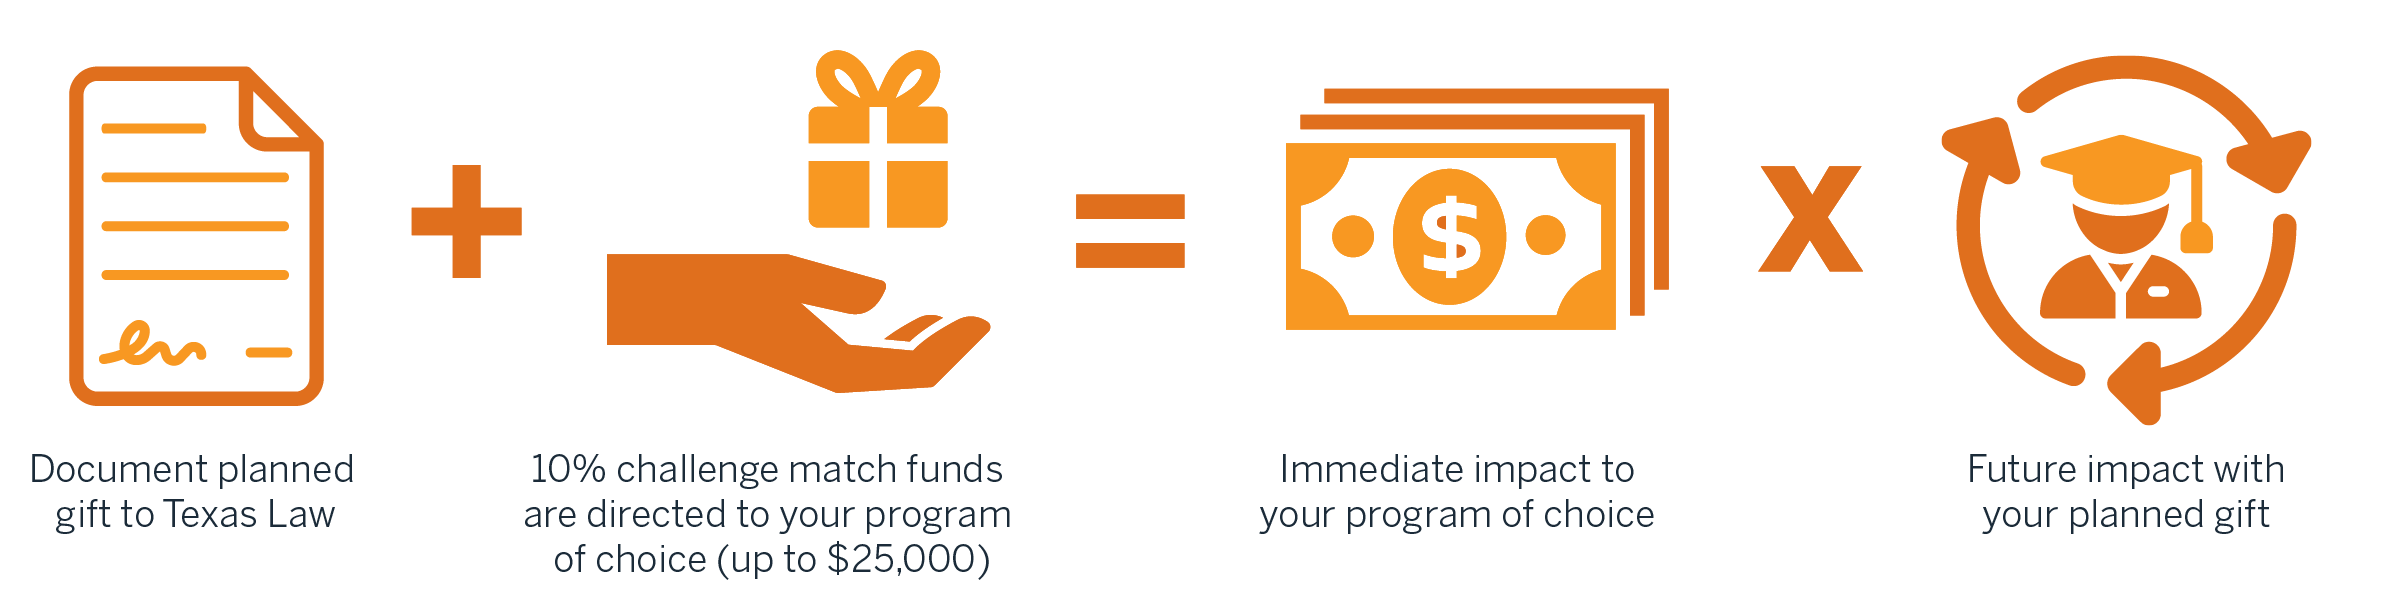 Document a planned gift to Texas Law. 10% challenge match funds are directed to the program of your choice. Immediate impact to your program of choice. Future impact with planned gift.